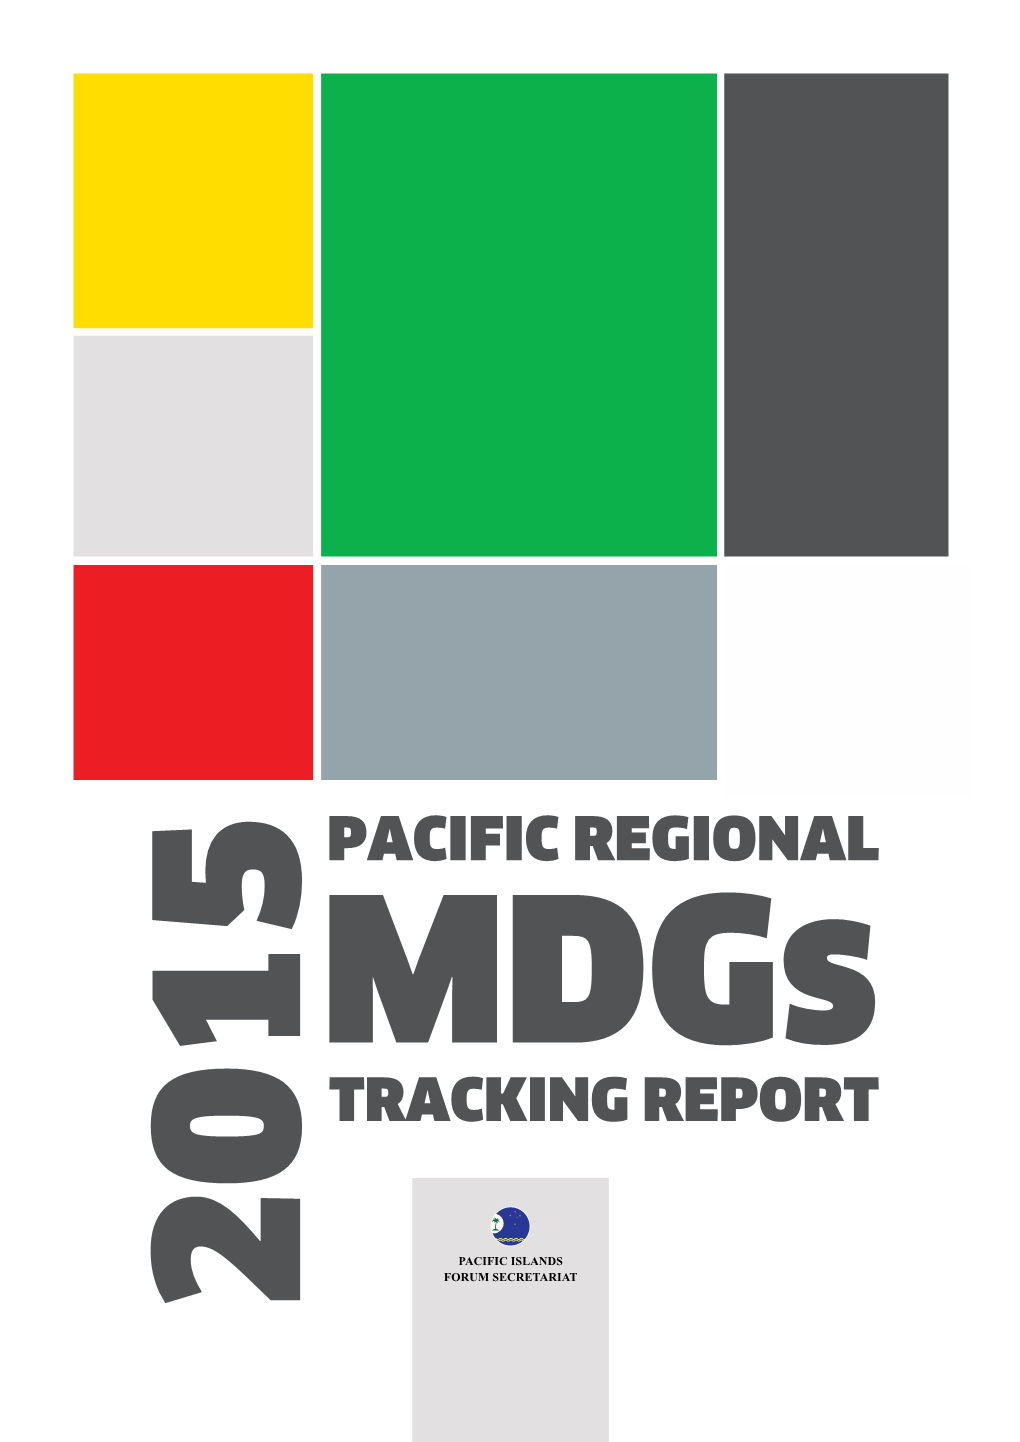 Mdgs Tracking Report Mdgs TWG Consisted of Representatives / Prepared by the Pacific Islands Forum from ADB, Australian DFAT, SPC, UNDP, Secretariat